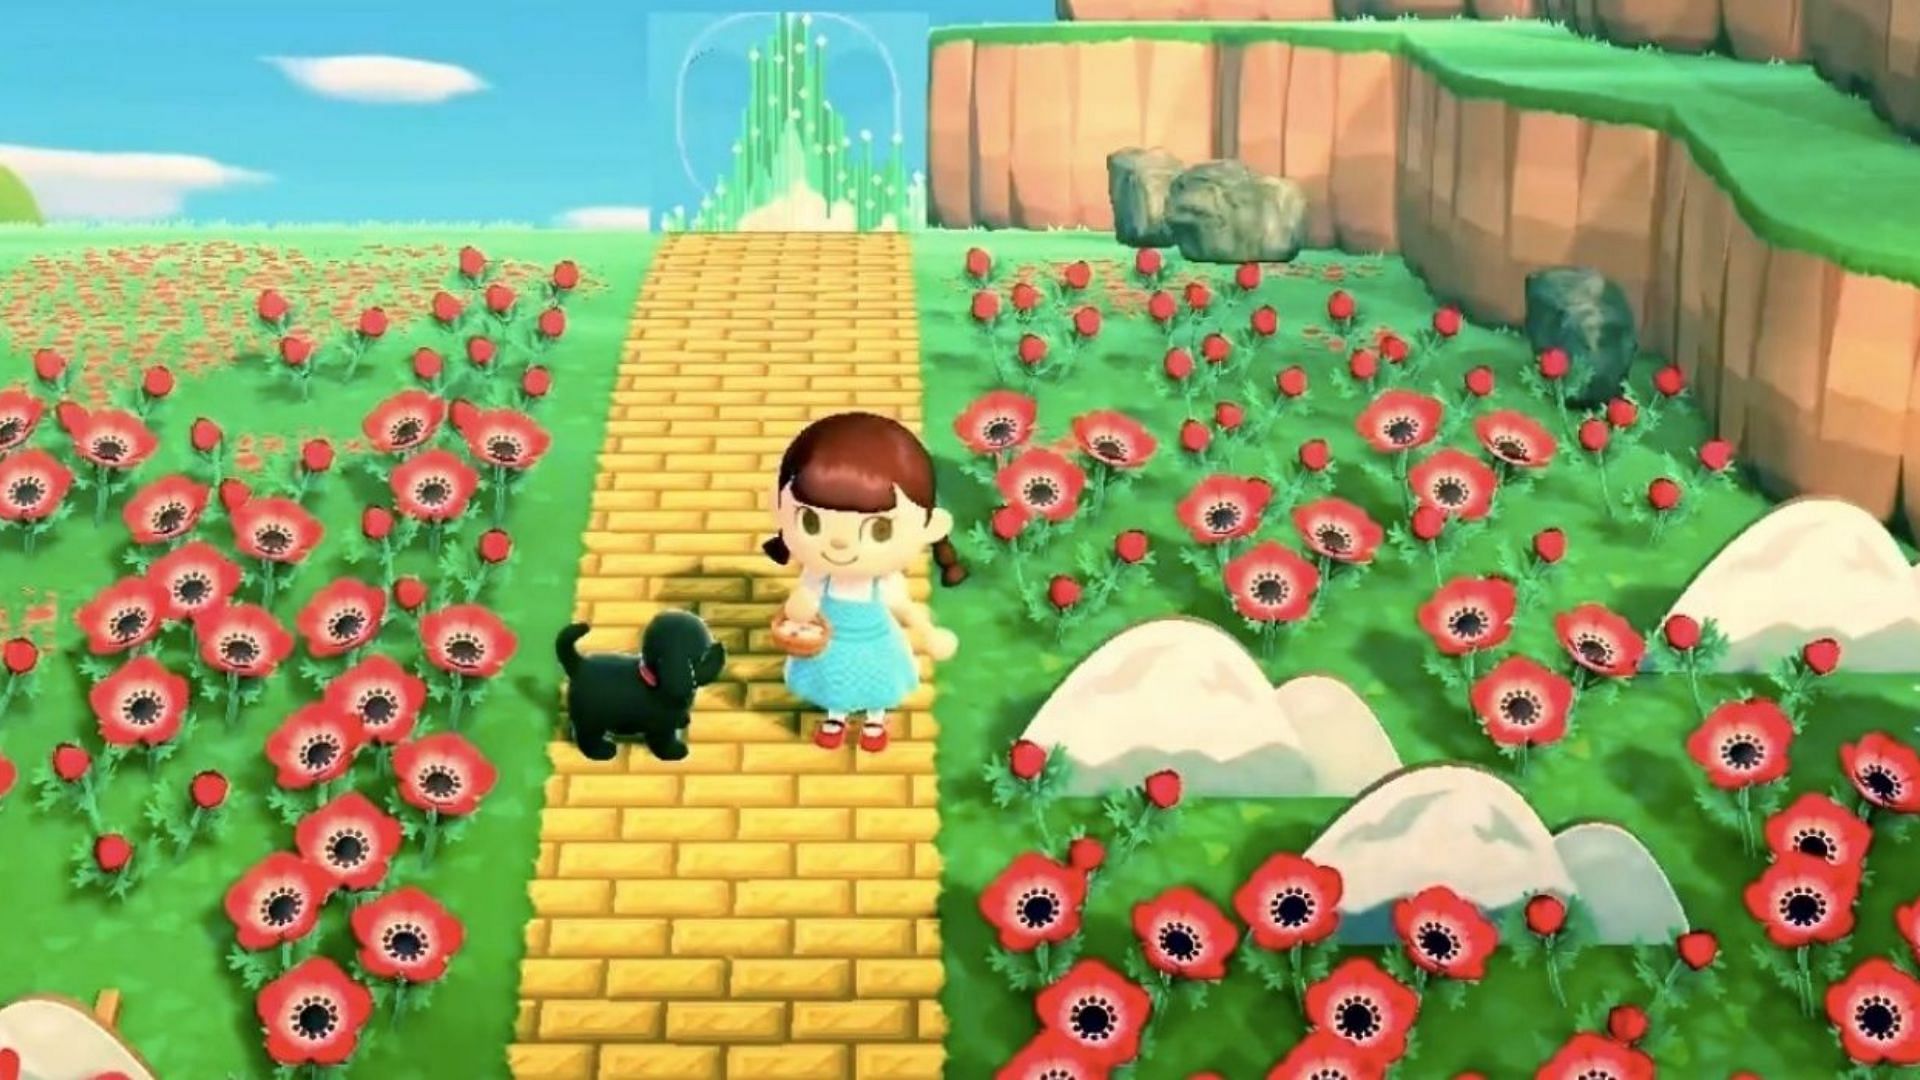 Animal Crossing: New Horizons has several pop culture references hidden in the game (Image via NigeriaPenng)